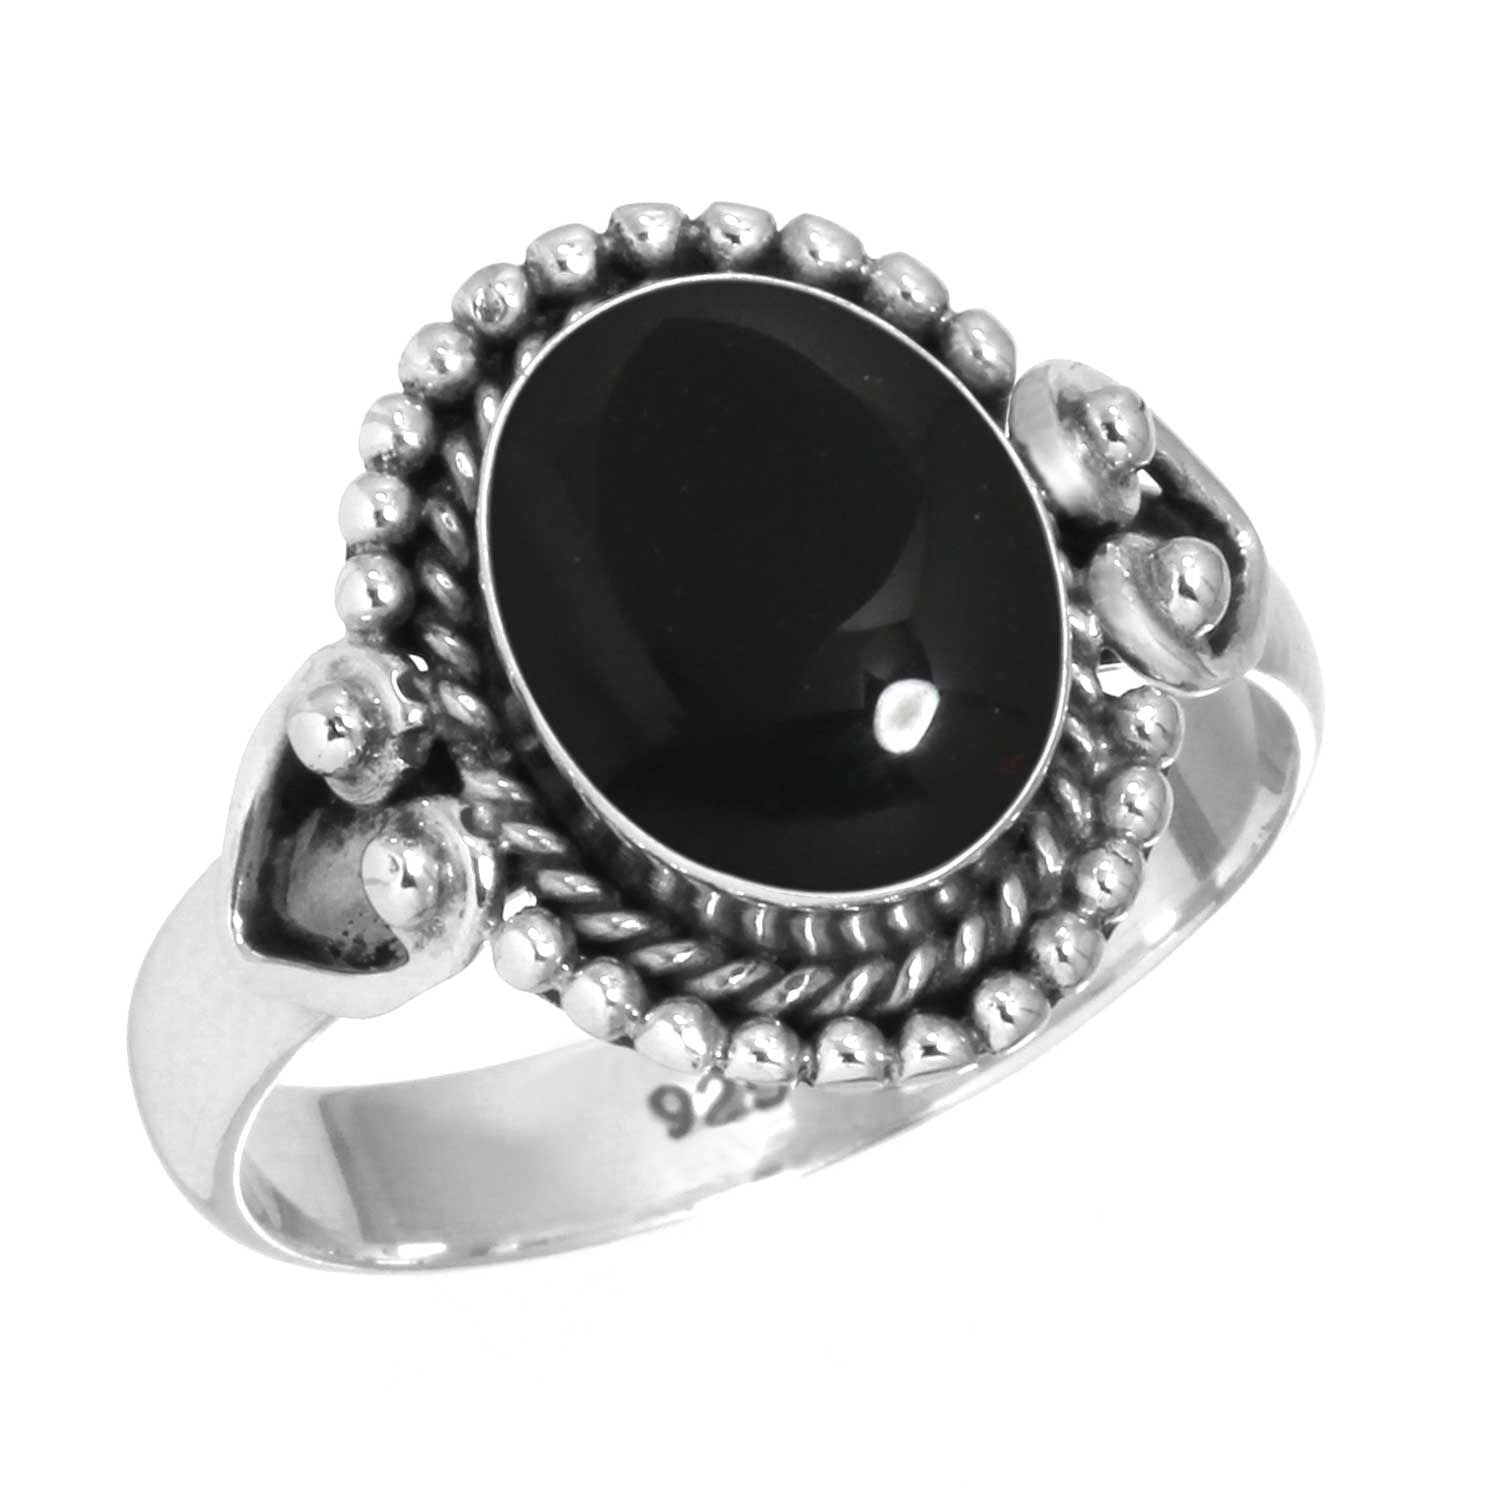 Black Onyx 925 Silver Plated Handmade Jewelry Ring US Size 6 R-18992